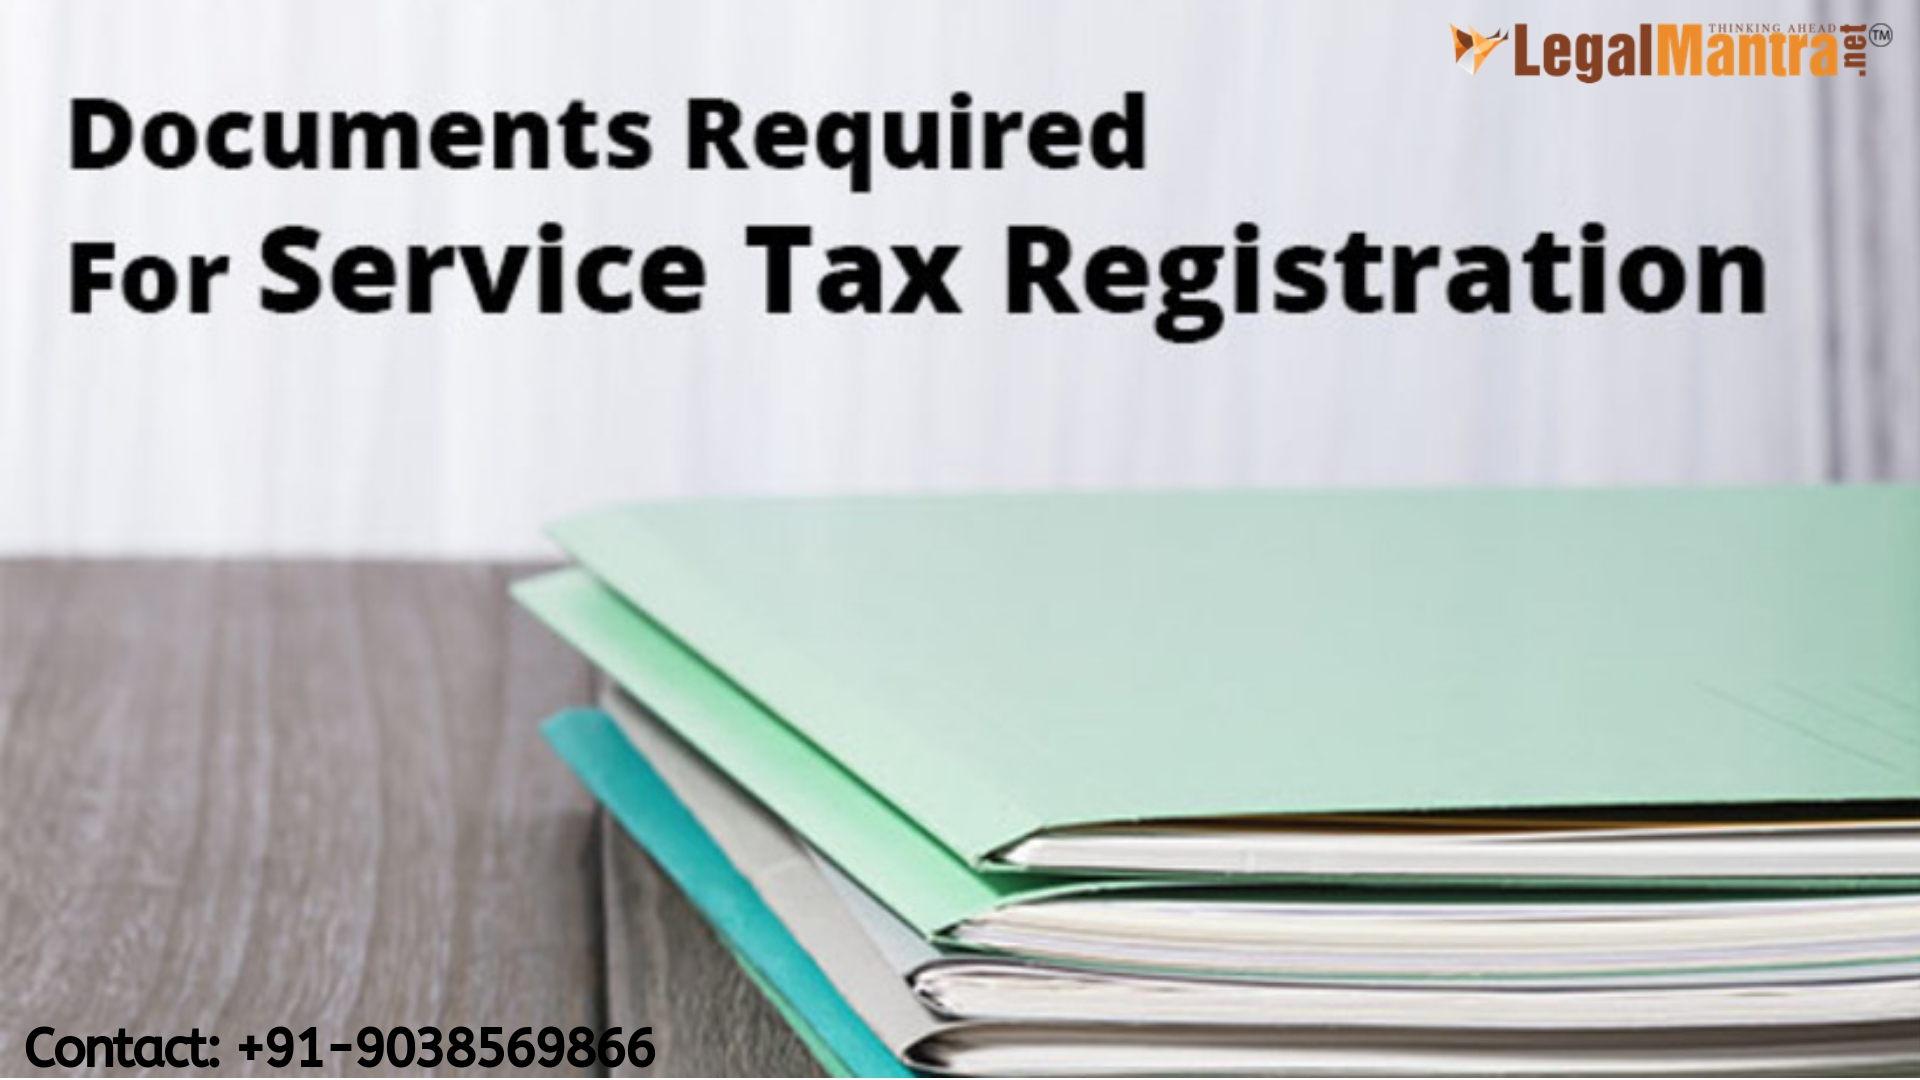 Documents Required for Service Tax Registration